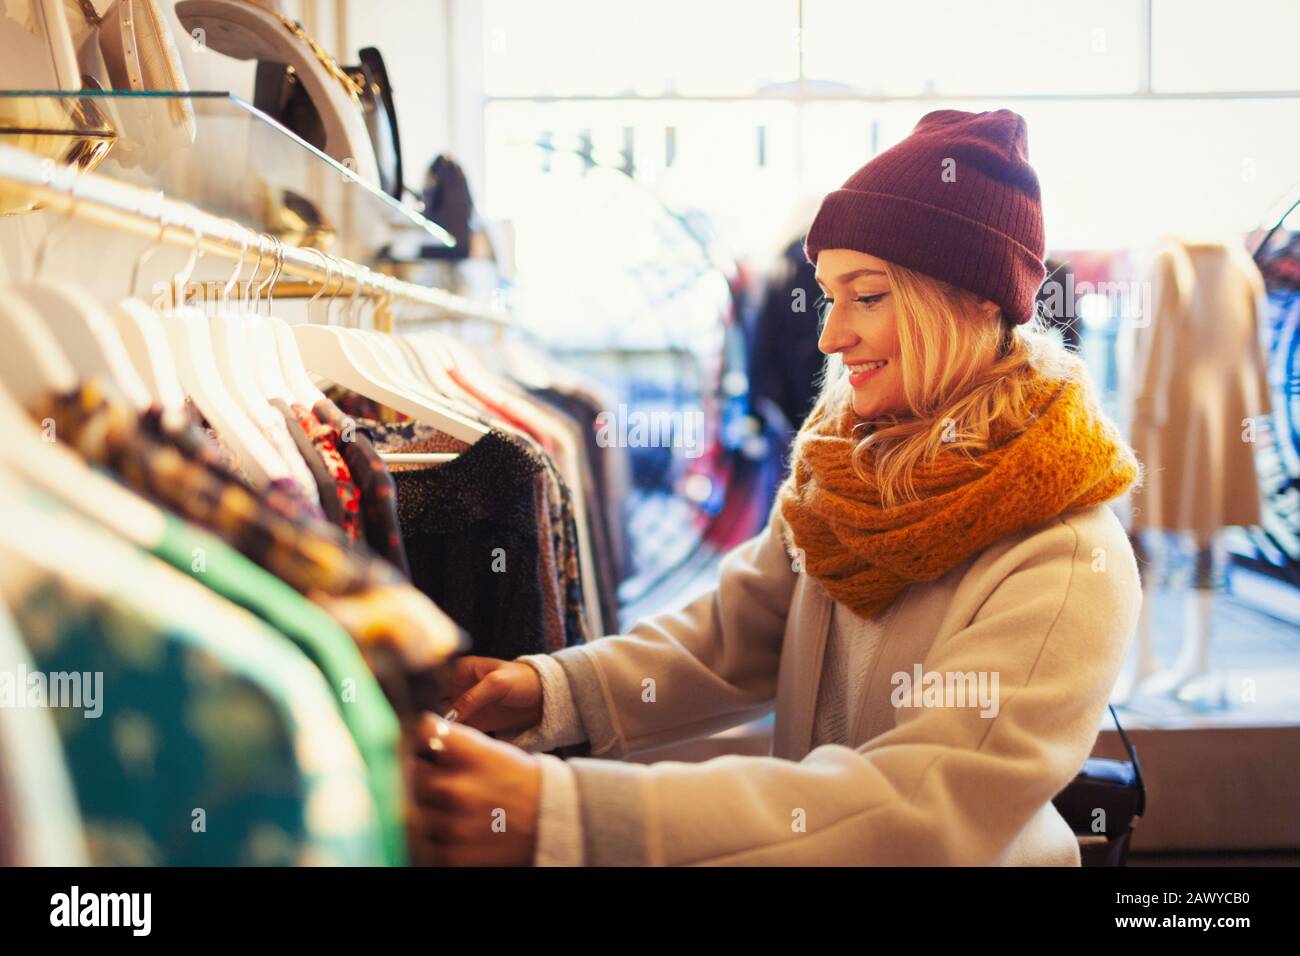 Young woman clothing shopping Stock Photo